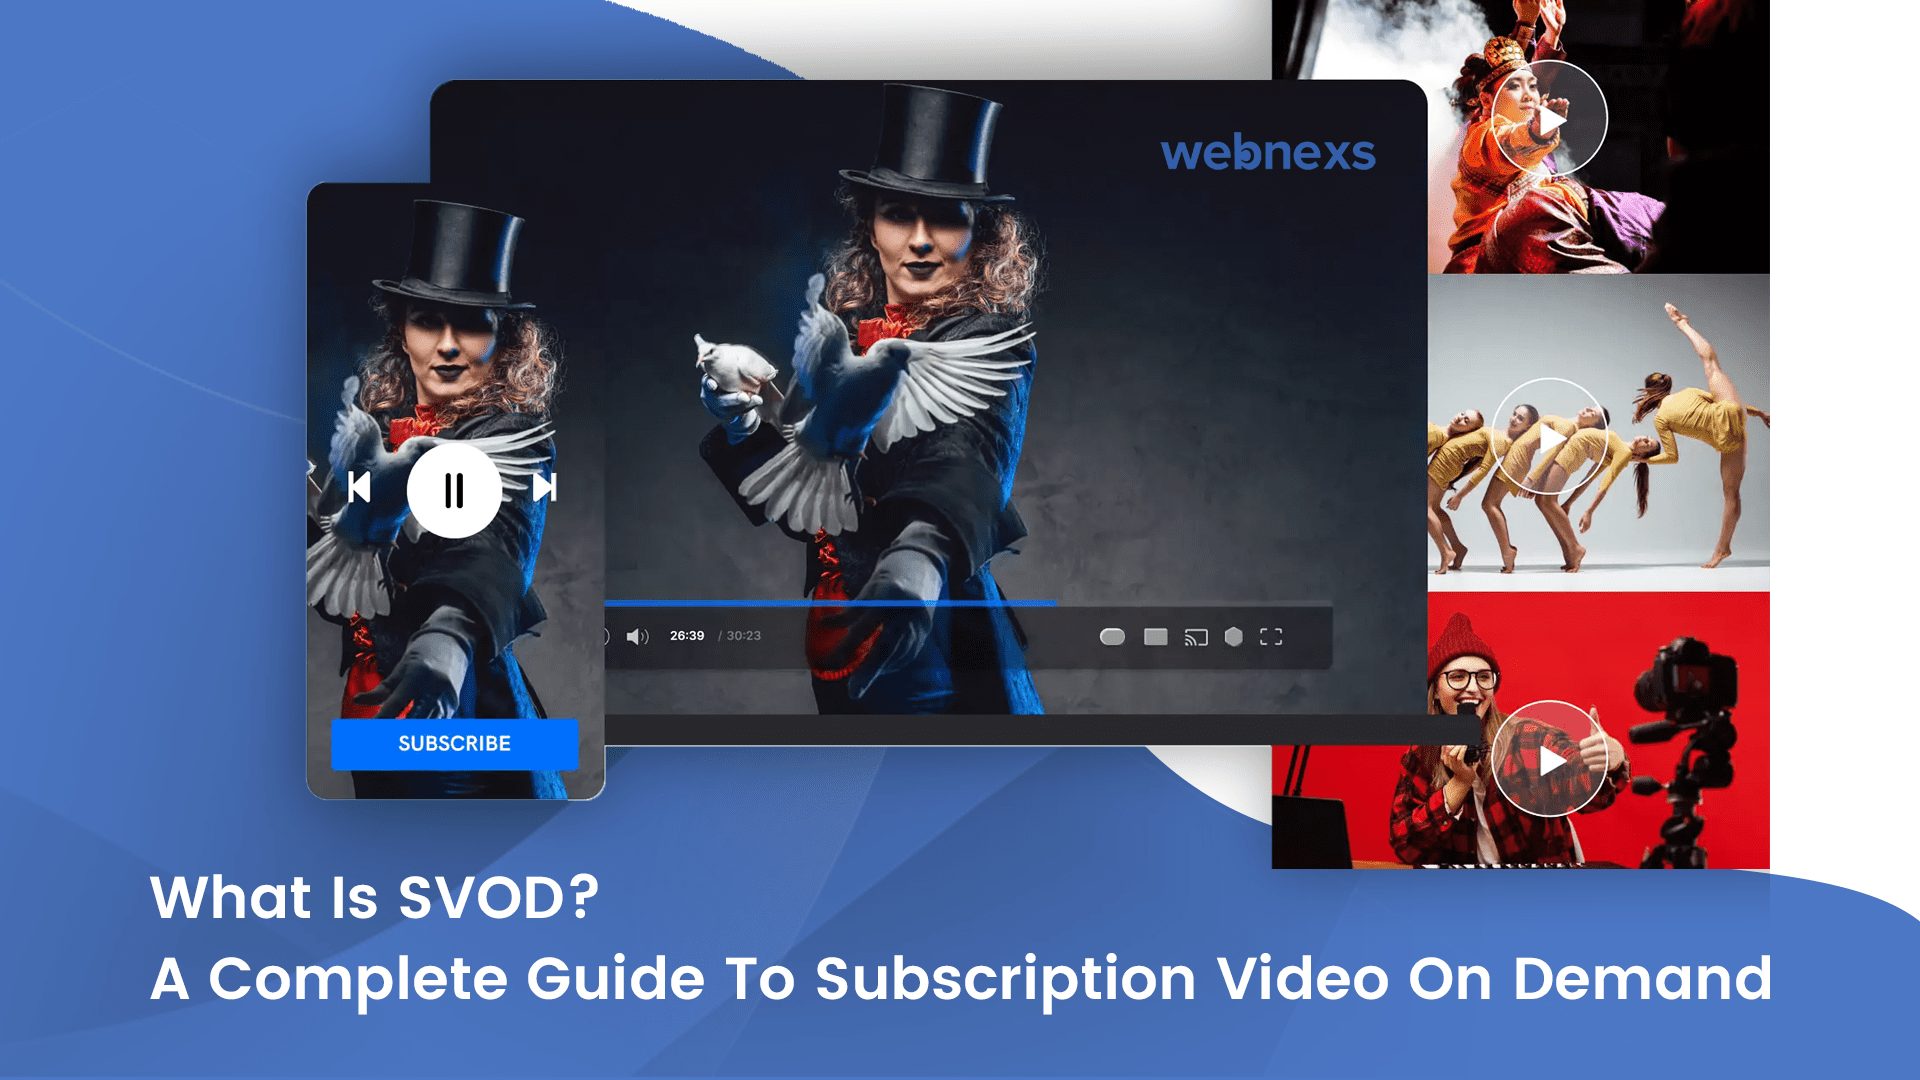 What Is SVOD? A Complete Guide To Subscription Video On Demand